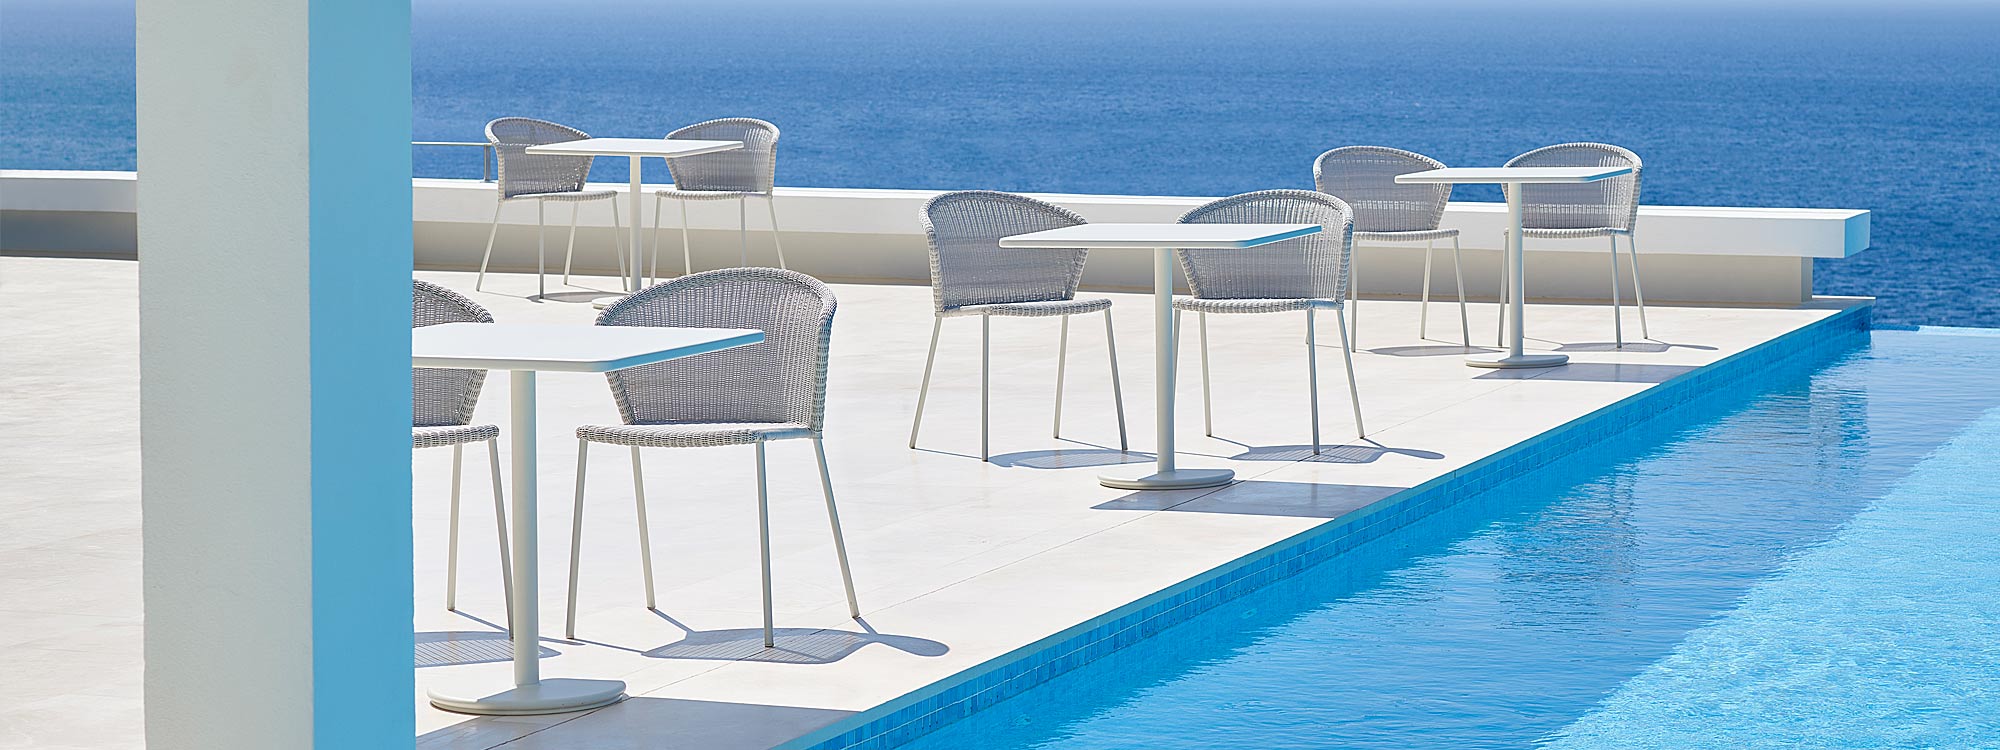 Lean rattan garden chair is a modern outdoor dining chair in high quality garden furniture materials by Caneline garden furniture company.